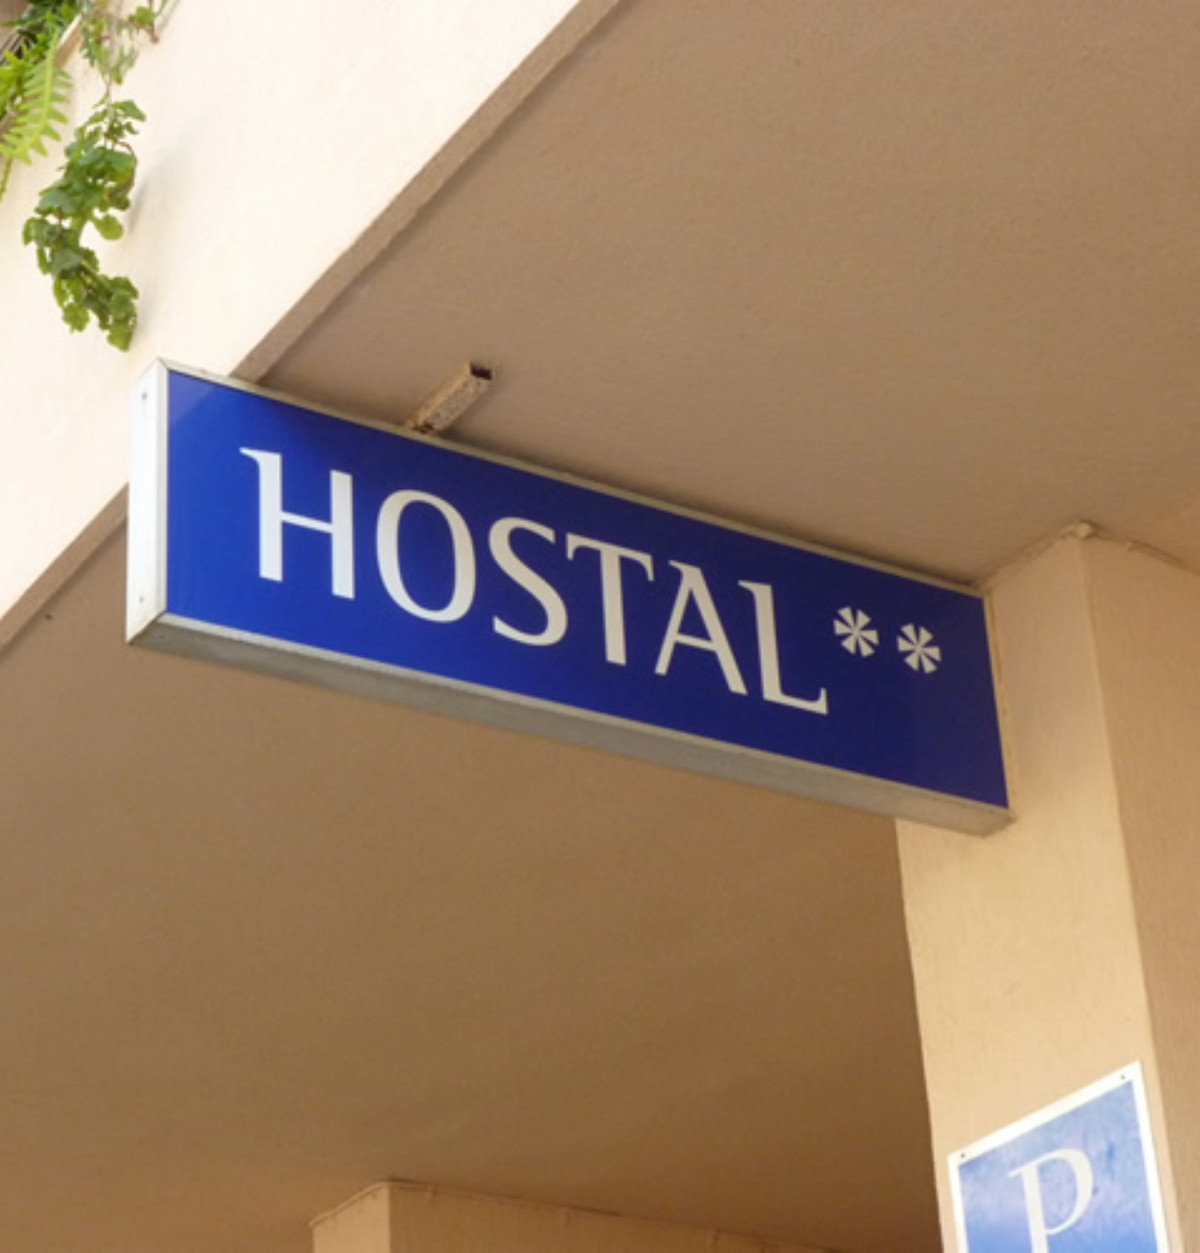 Hostal for Sale in Fuengirola.

Located in a very central position, close to the beach, town centre , Spain